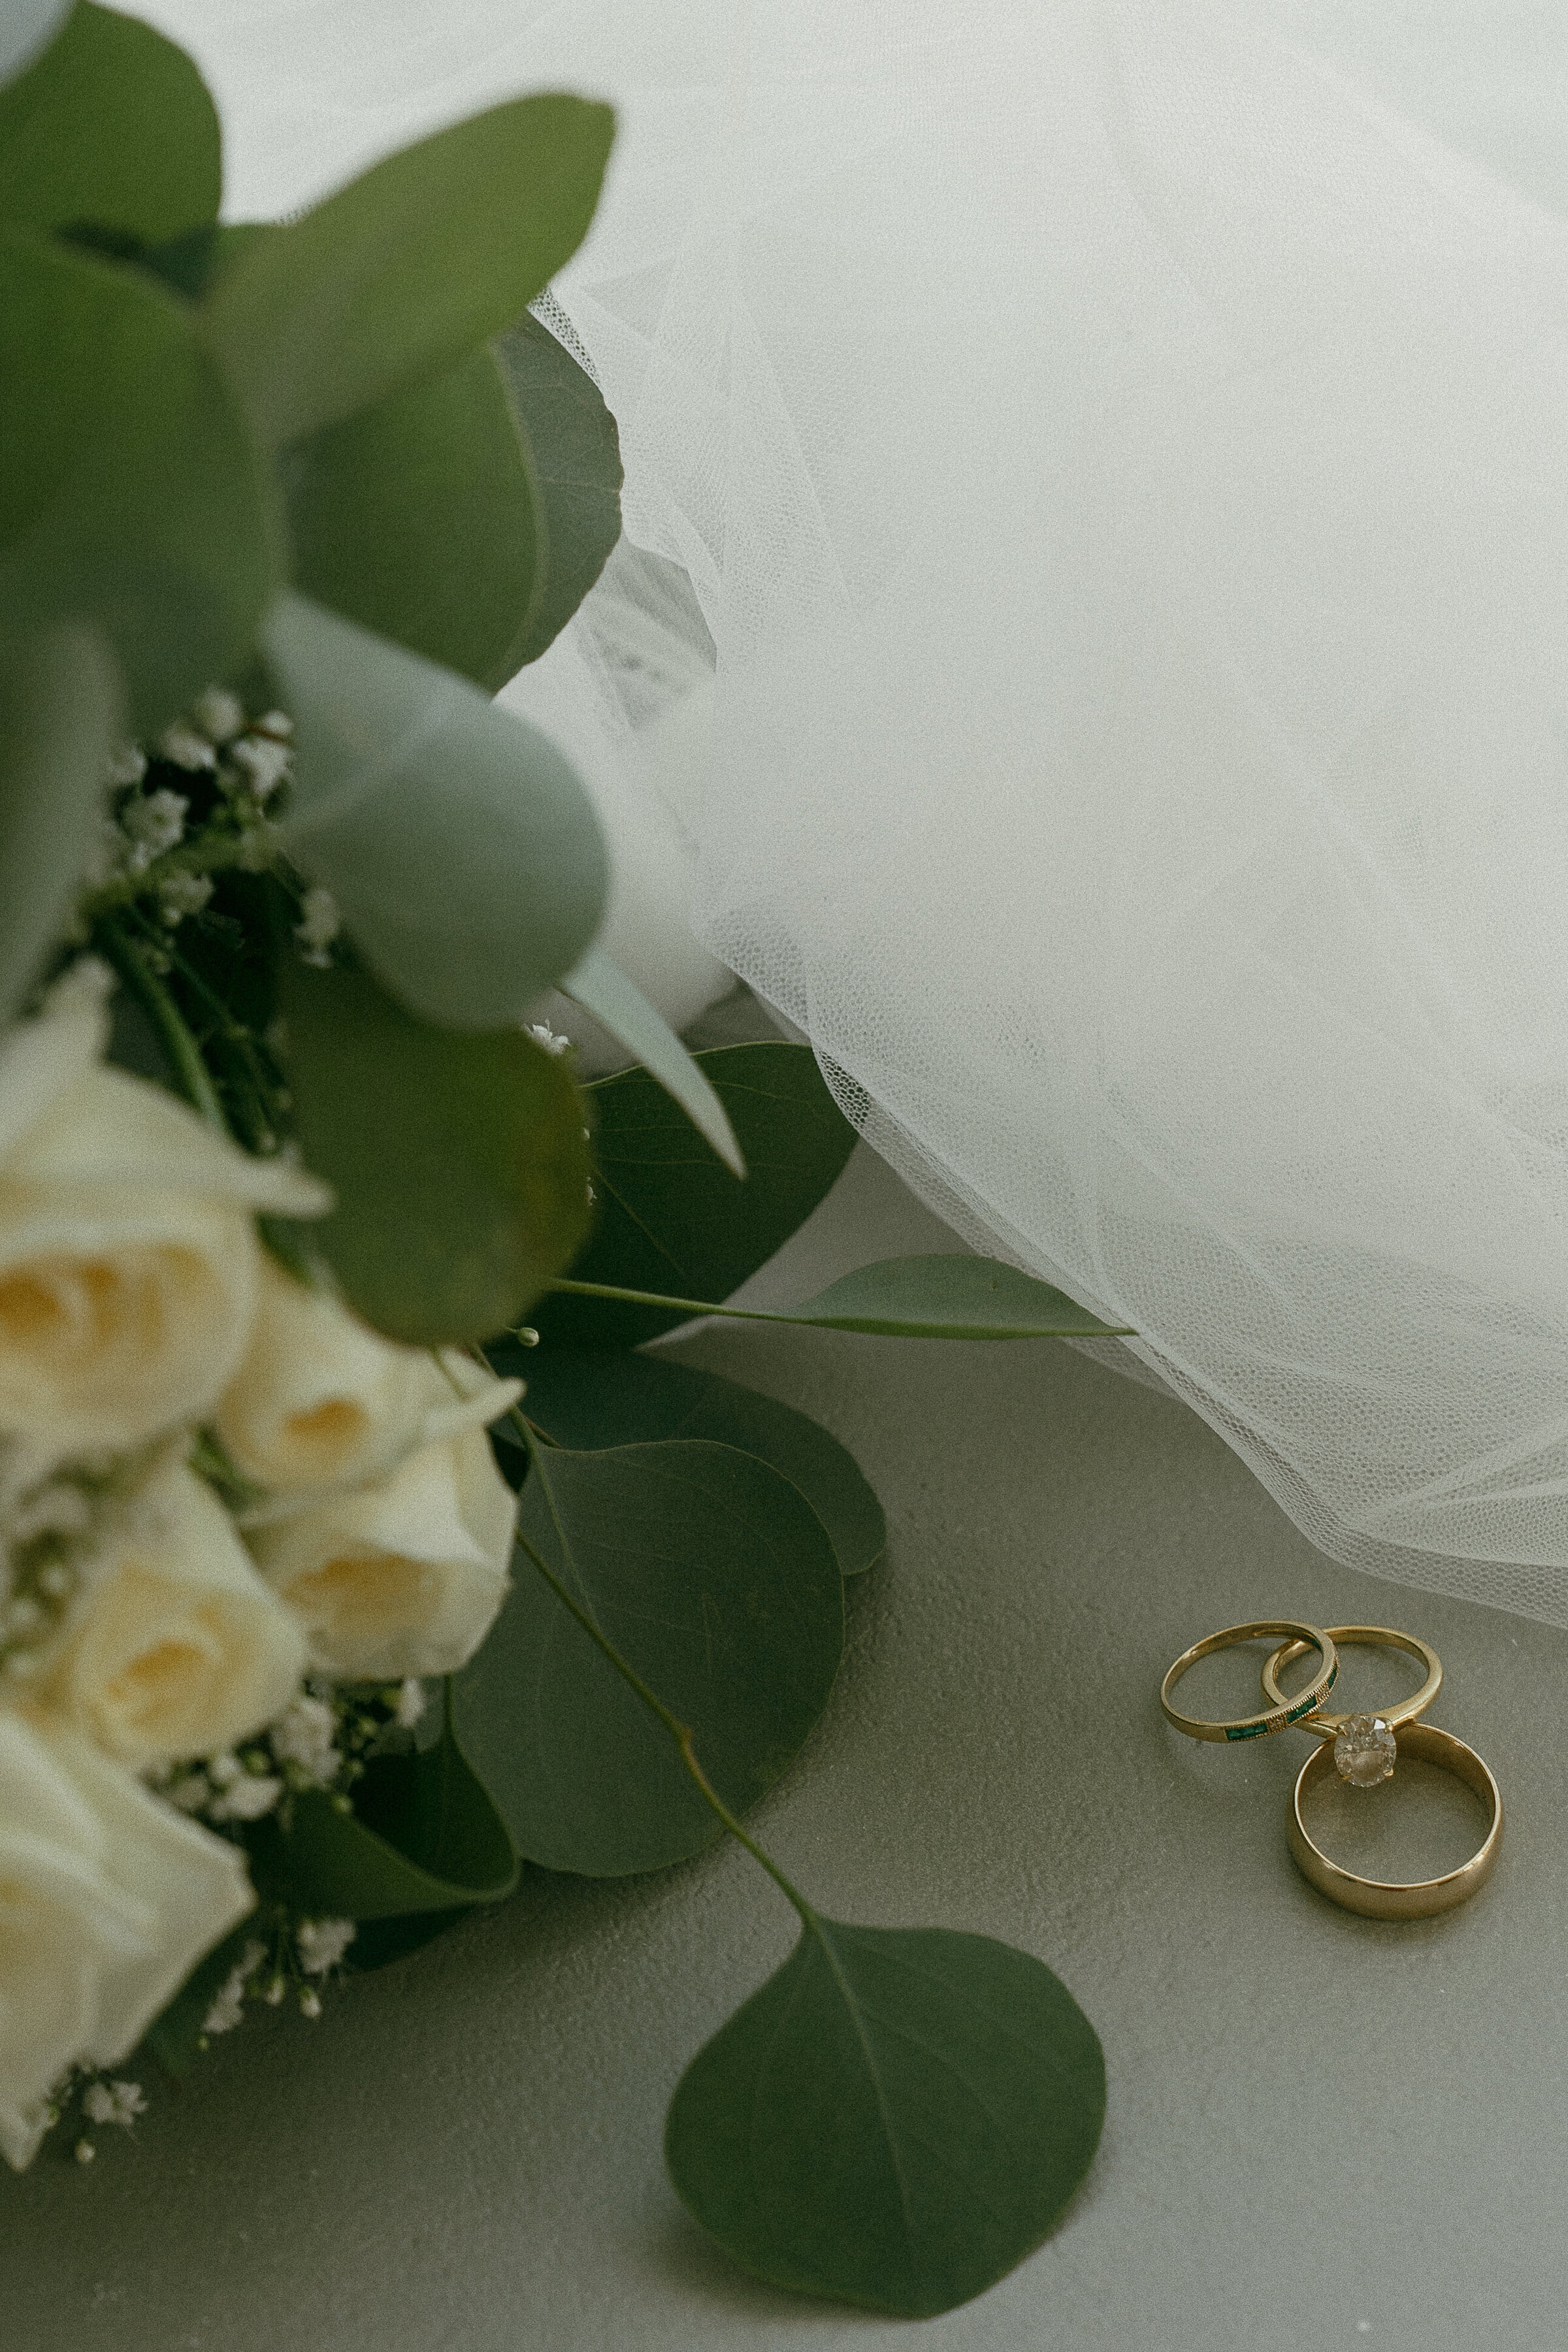 Wedding bouquet and veil on a surface with two gold wedding bands.